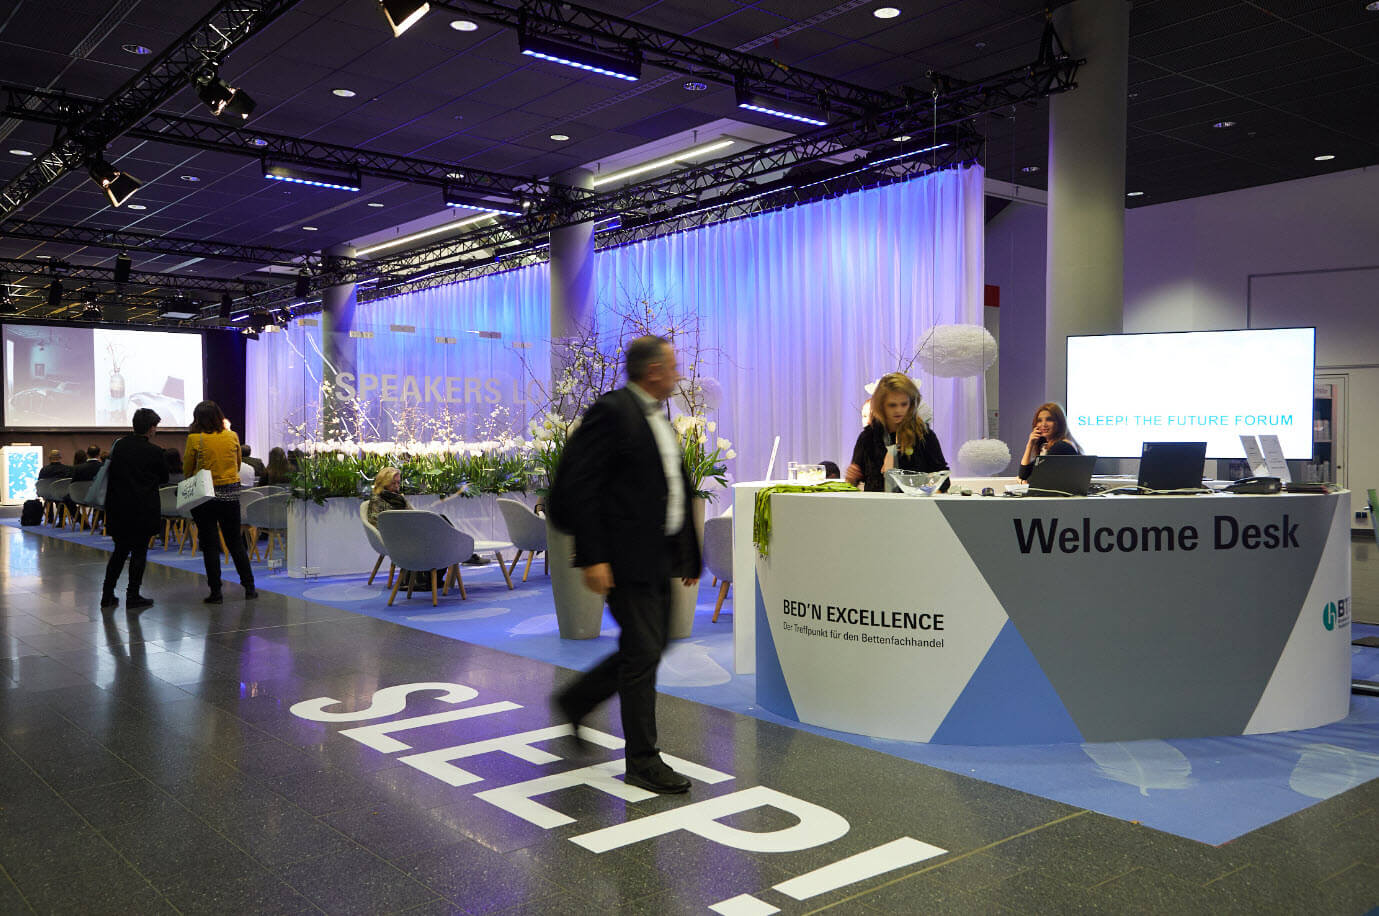 Heimtextil 2019 provides hope for a promising year 